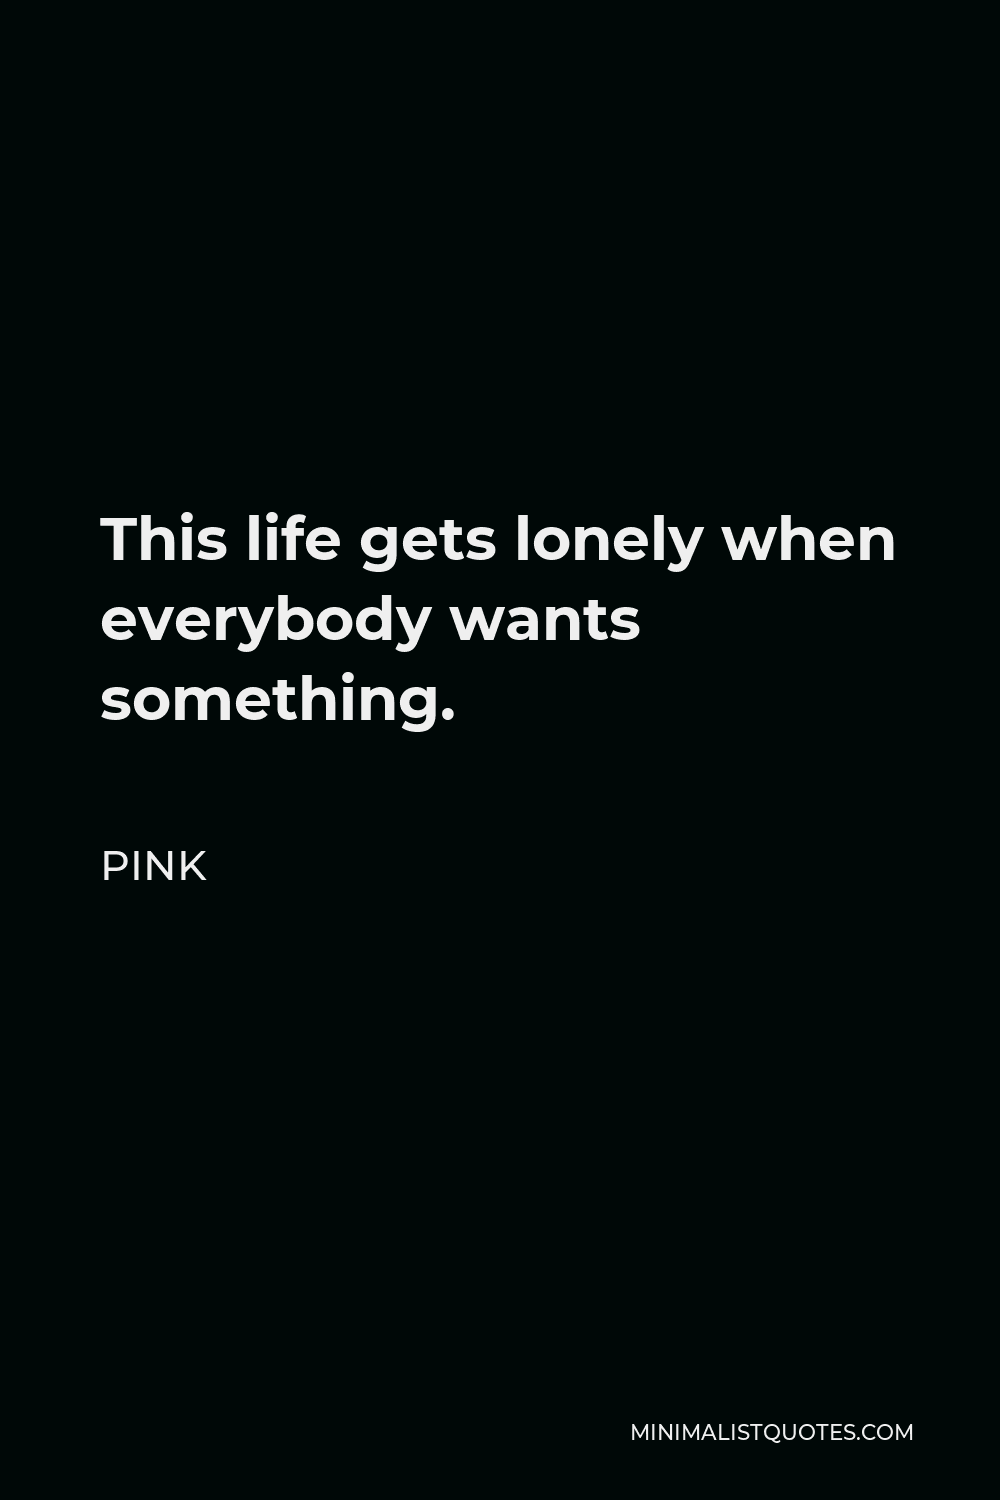 Pink Quote - This life gets lonely when everybody wants something.